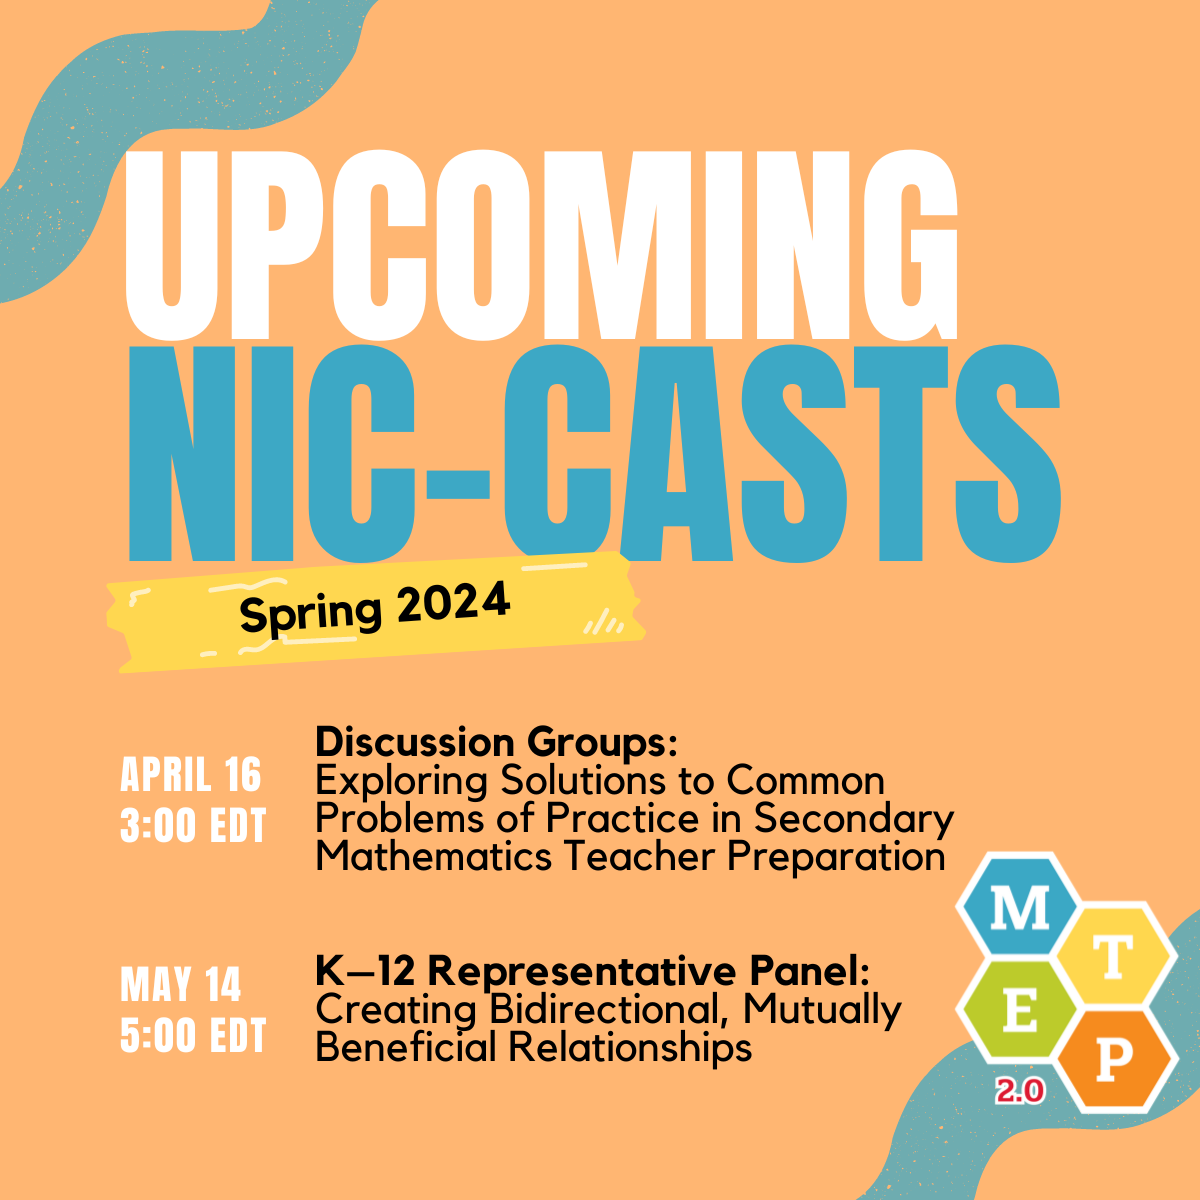 The discussion-based April NIC-Cast "Exploring Solutions to Common Problems of Practice in Secondary Mathematics Teacher Preparation" is April 16 at 3 p.m. EDT.